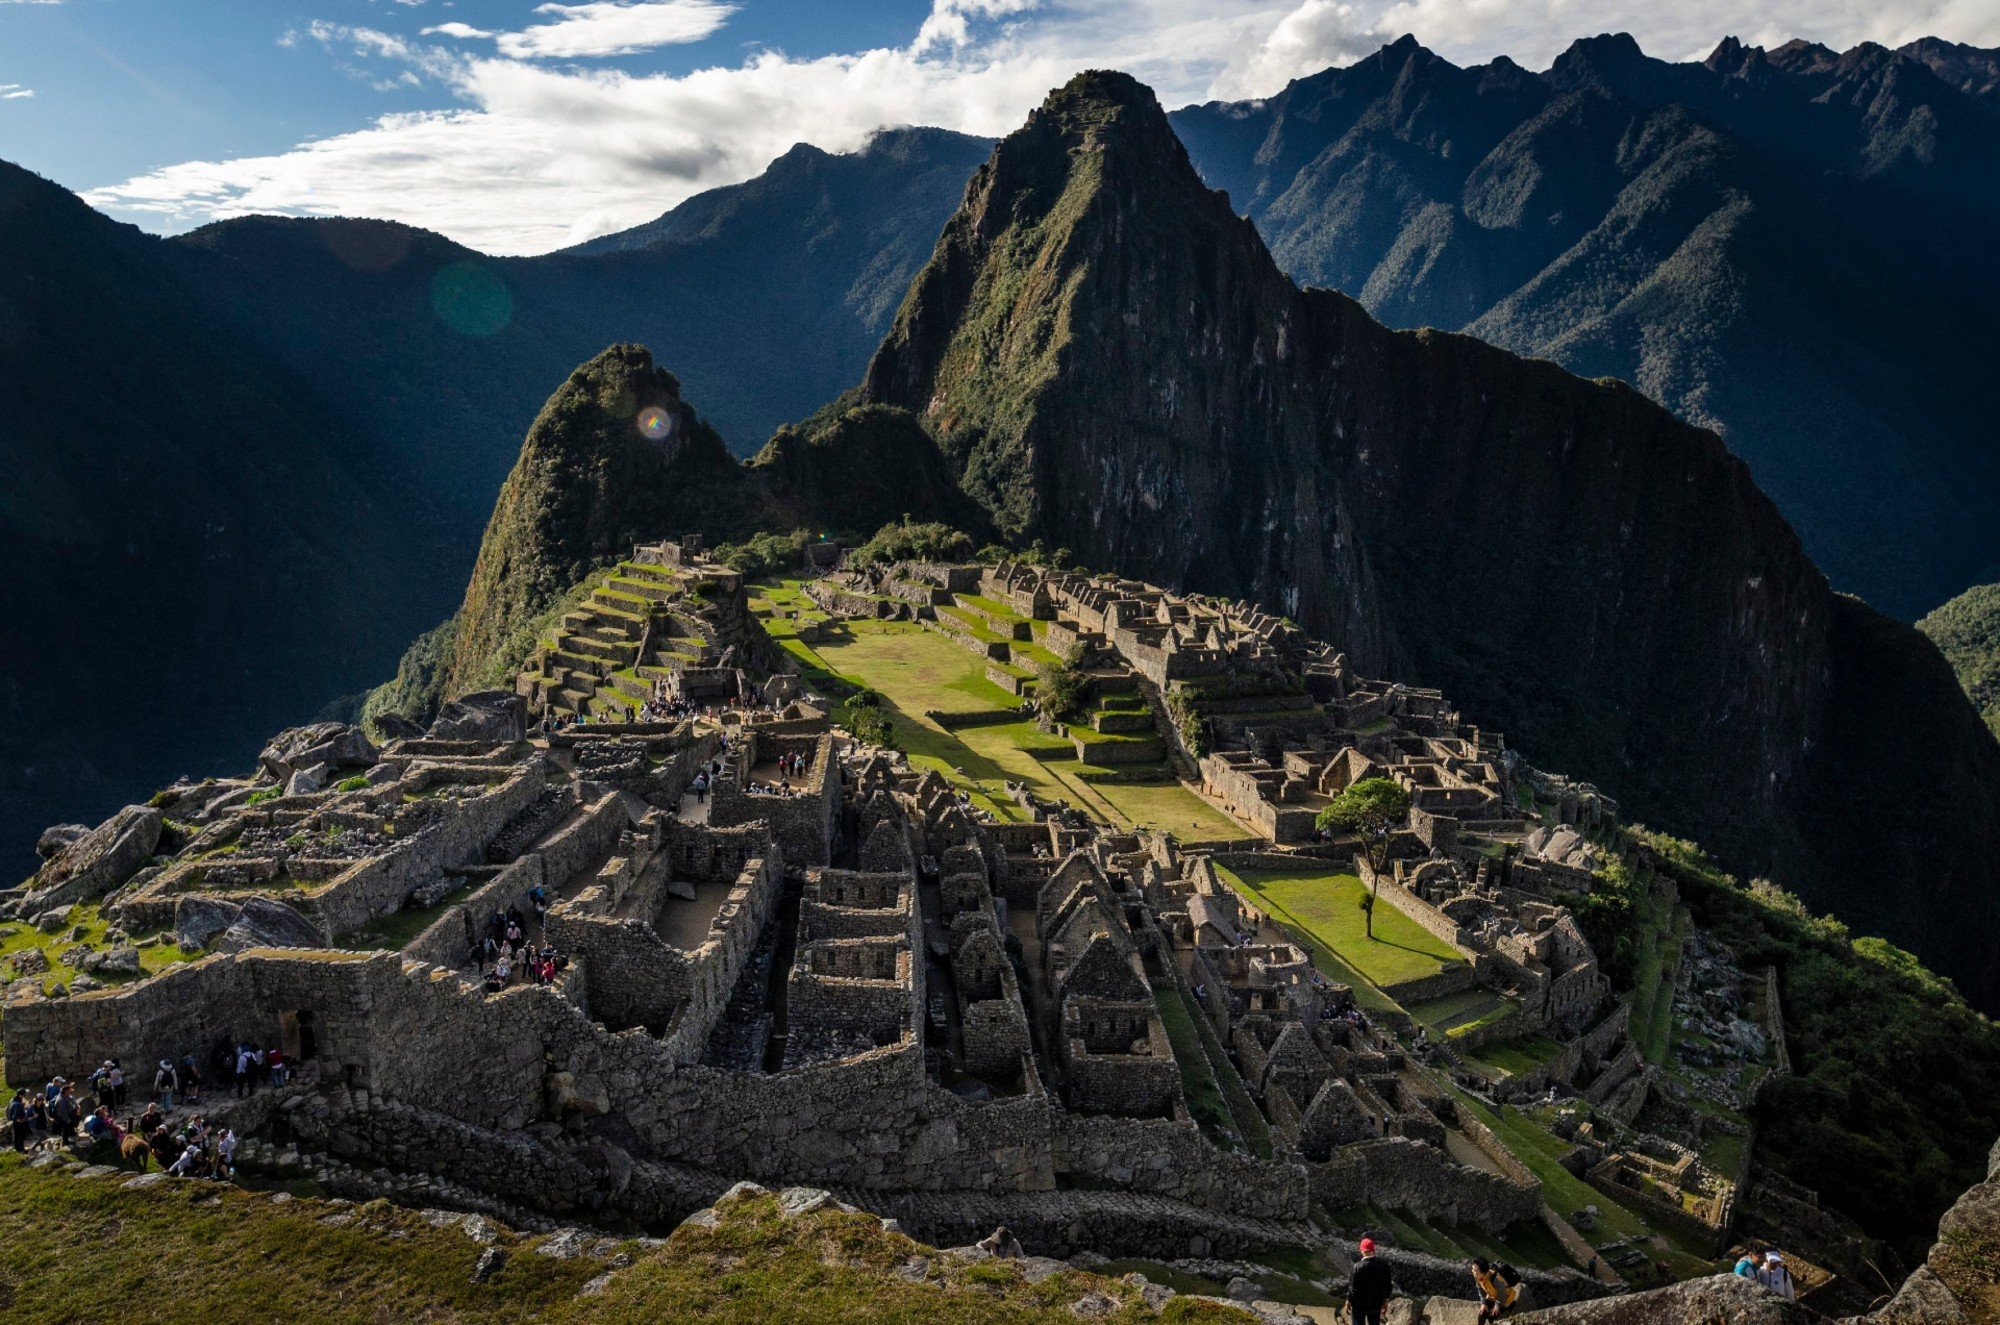 Machu Picchu: The Inca City in Peru Is Older Than Expected